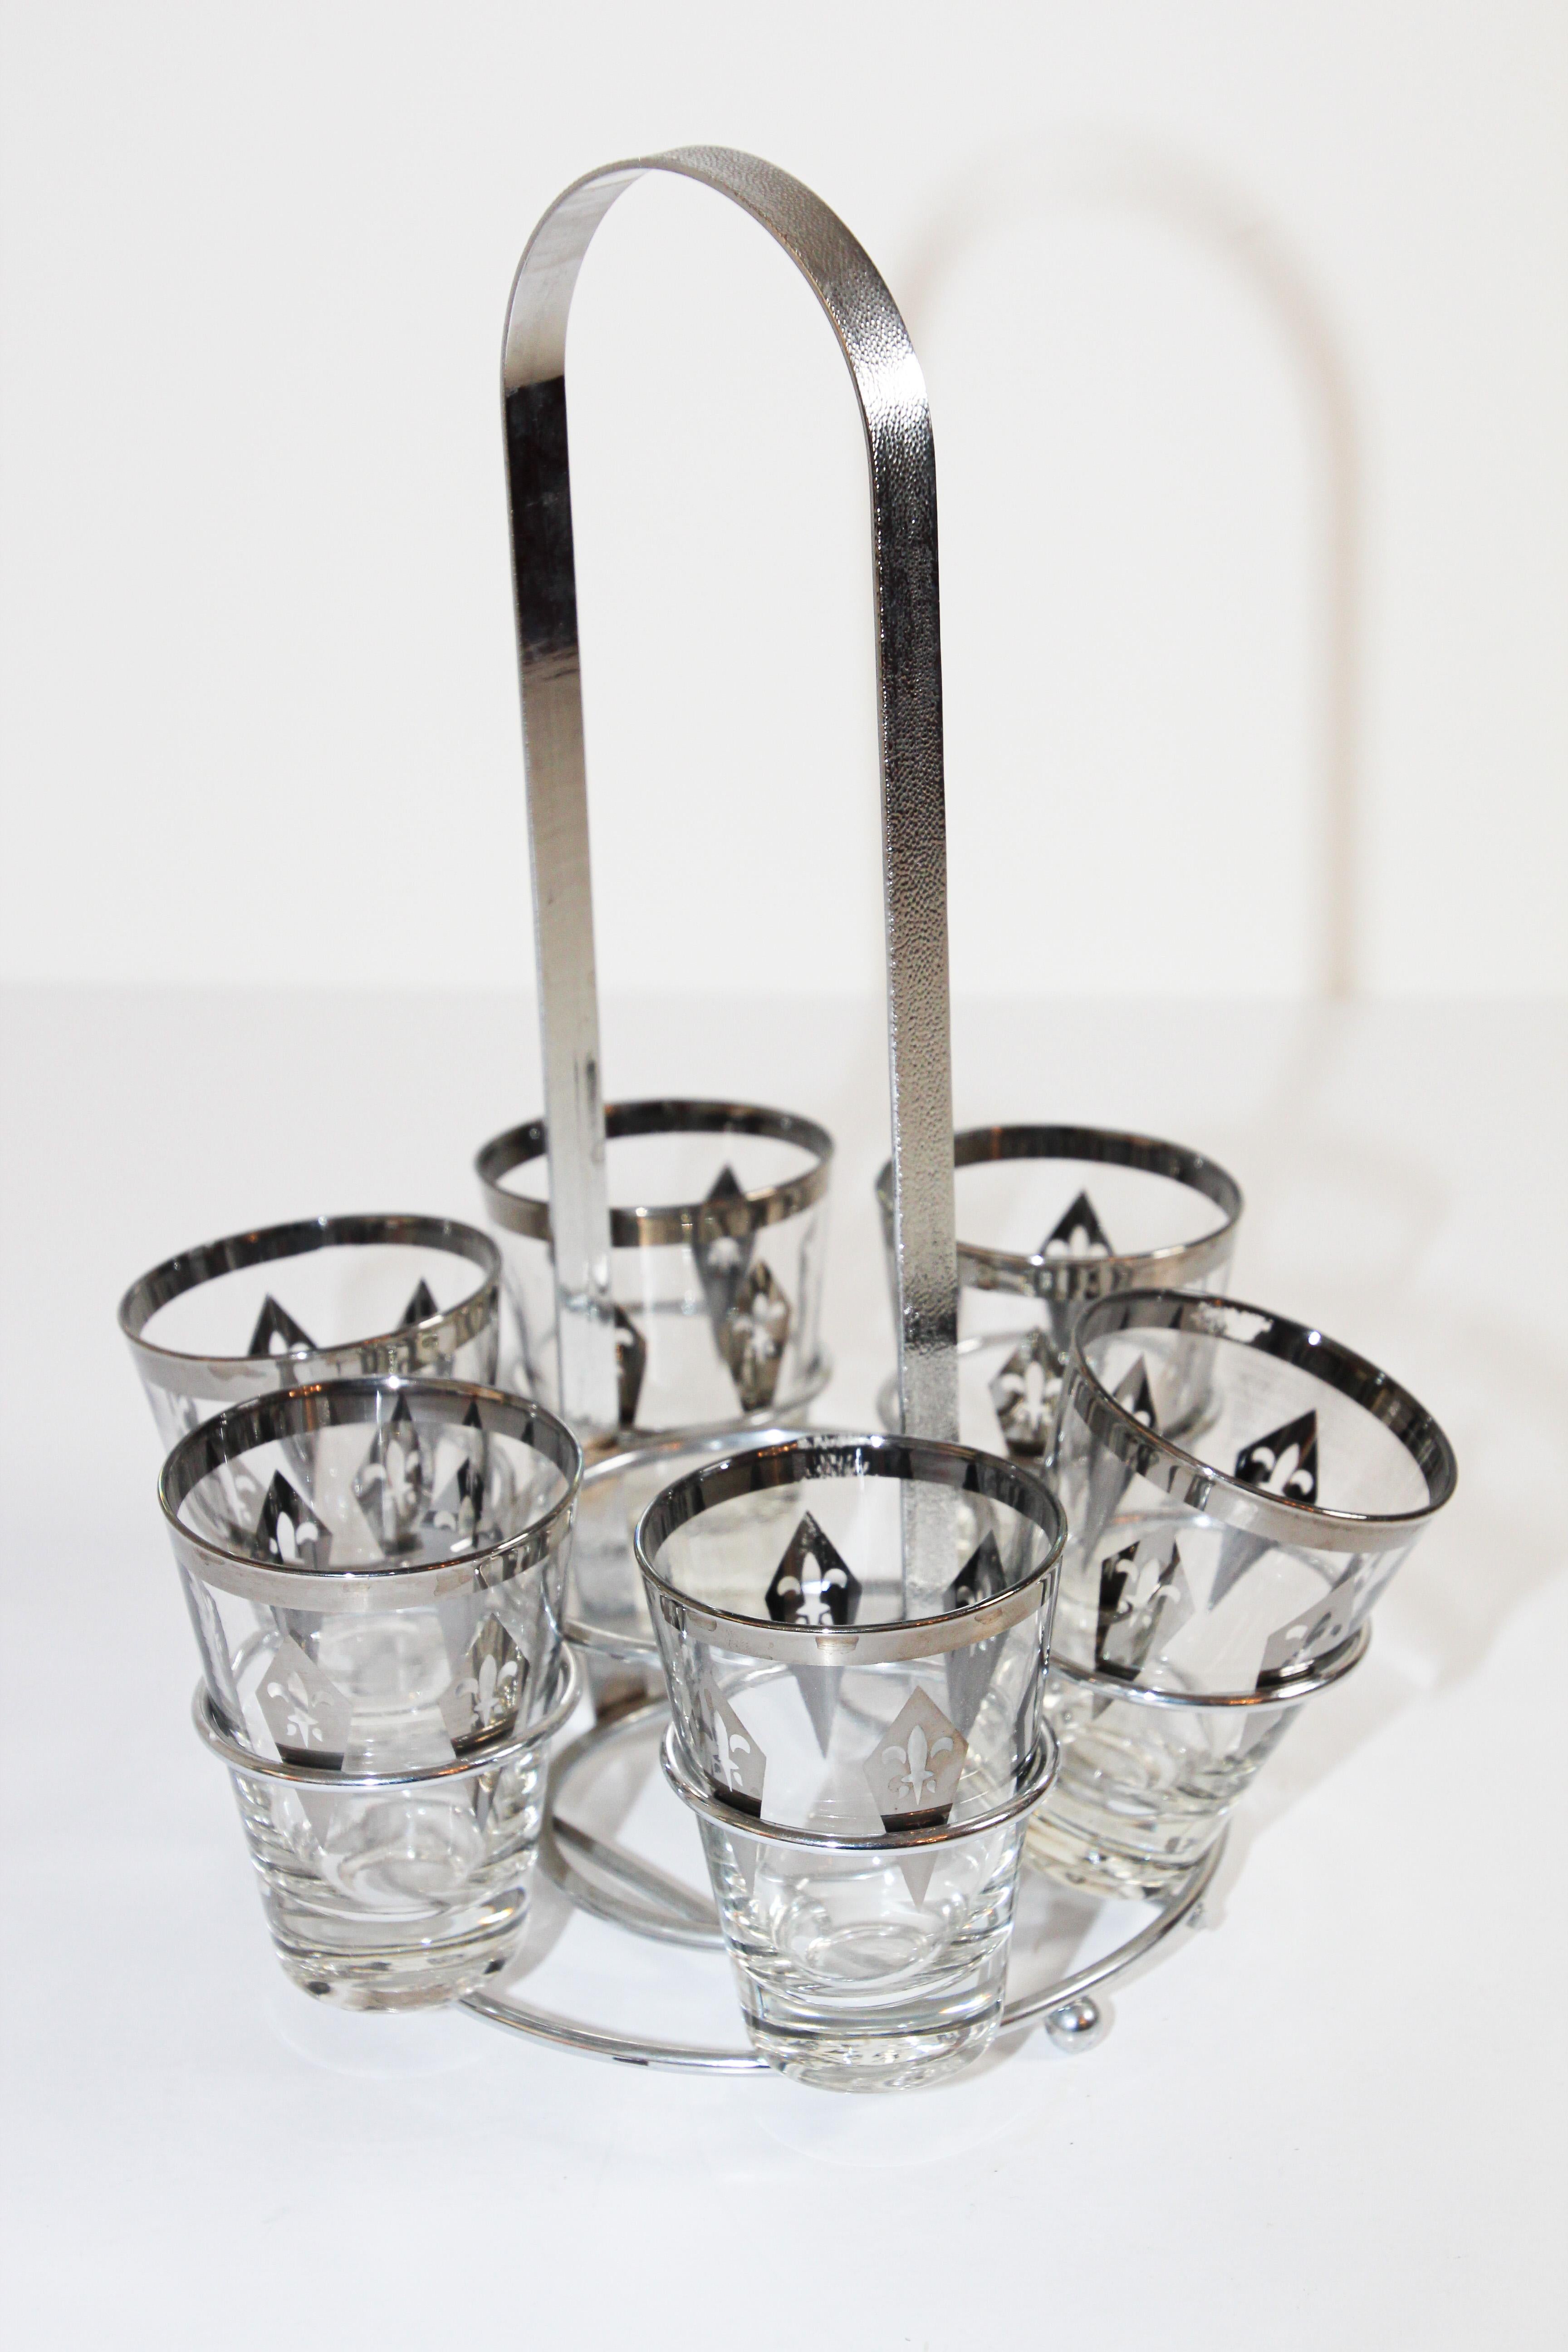 Vintage Barware Set of Six Glasses with Silver Overlay in Carrier Caddy 13